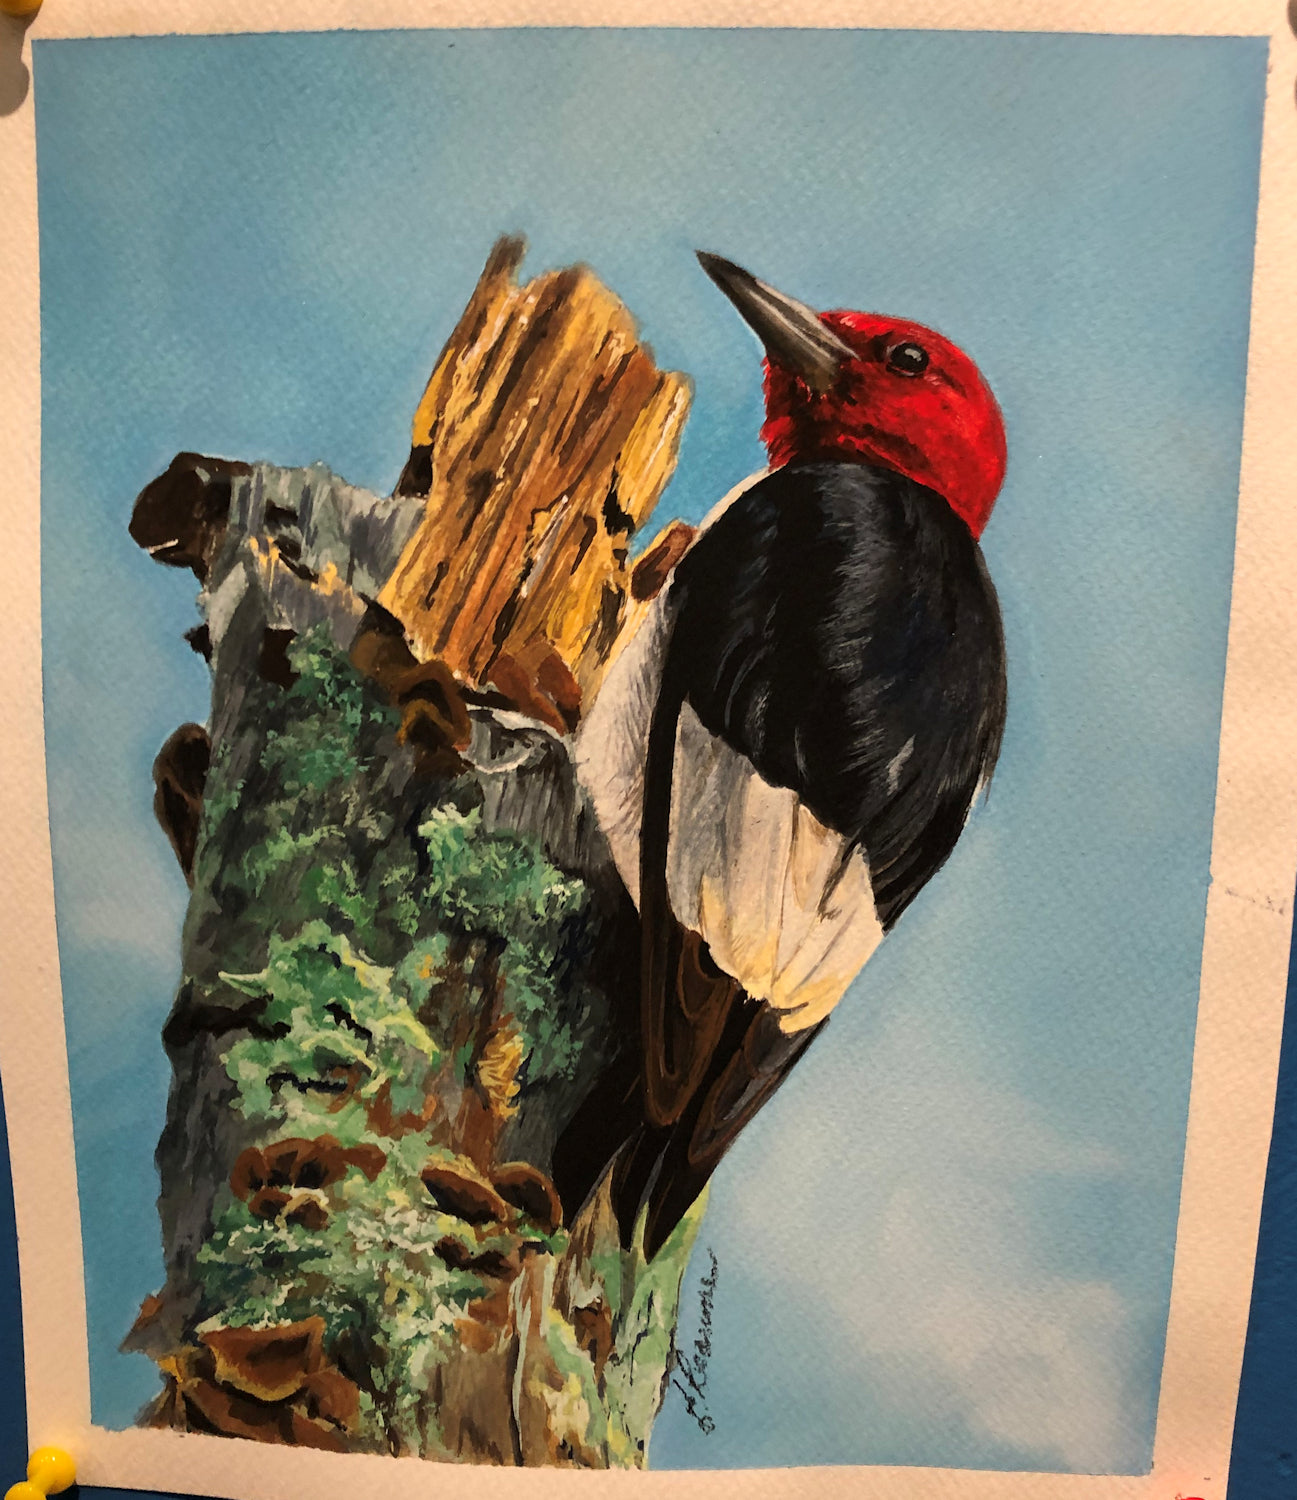 Original Gouache Painting by Elaine Reaume, Signed on Acid Free Paper: Red Headed Woodpecker